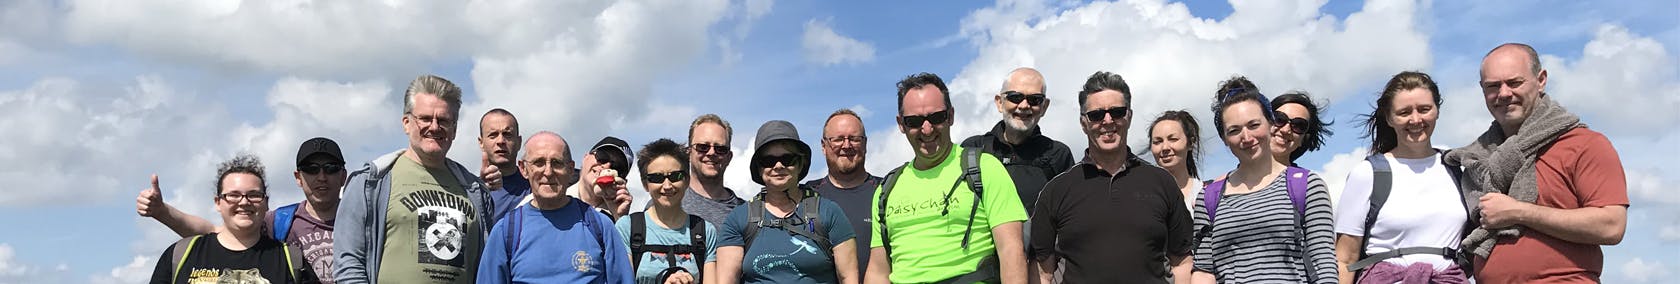 Team of people who have taken on the Cleveland 4 Peaks Challenge